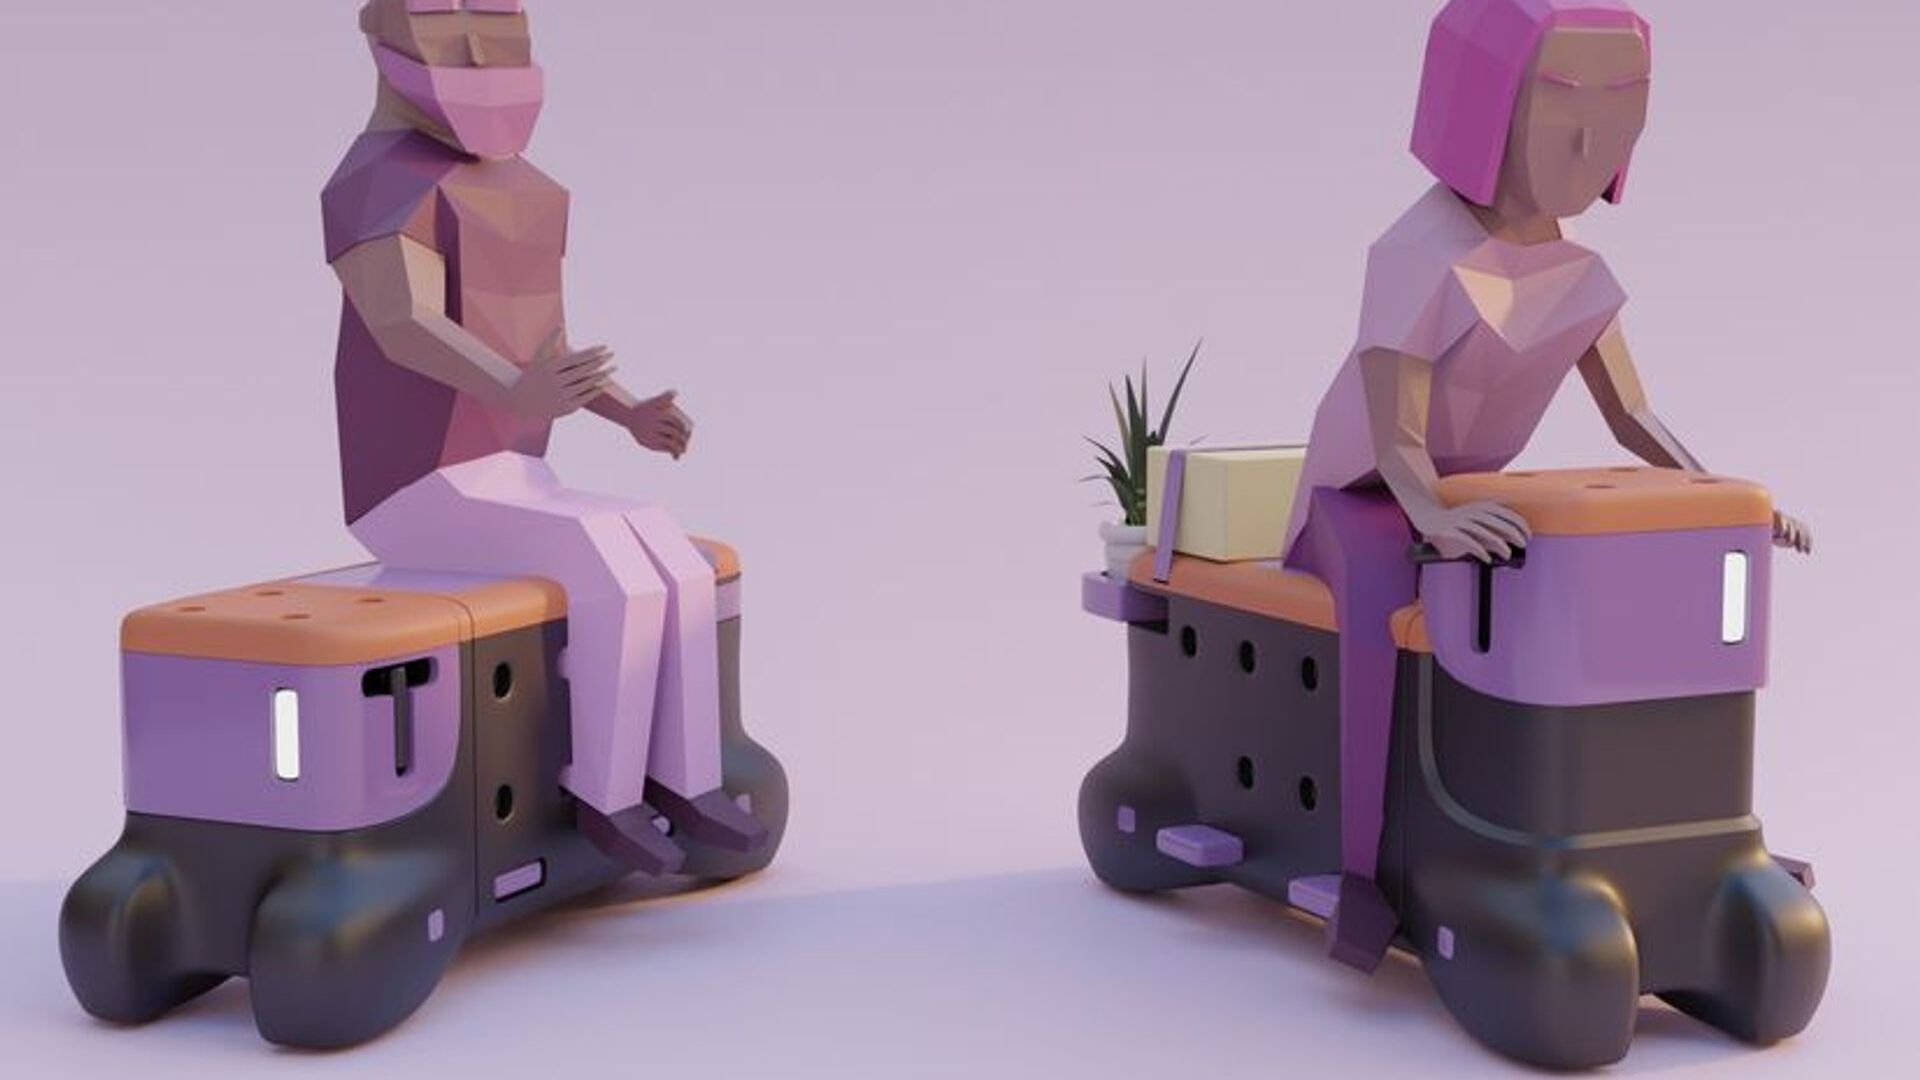 'TOD' is the scooter-bench created by design students Corentin Janel and Guillaume Innocenti